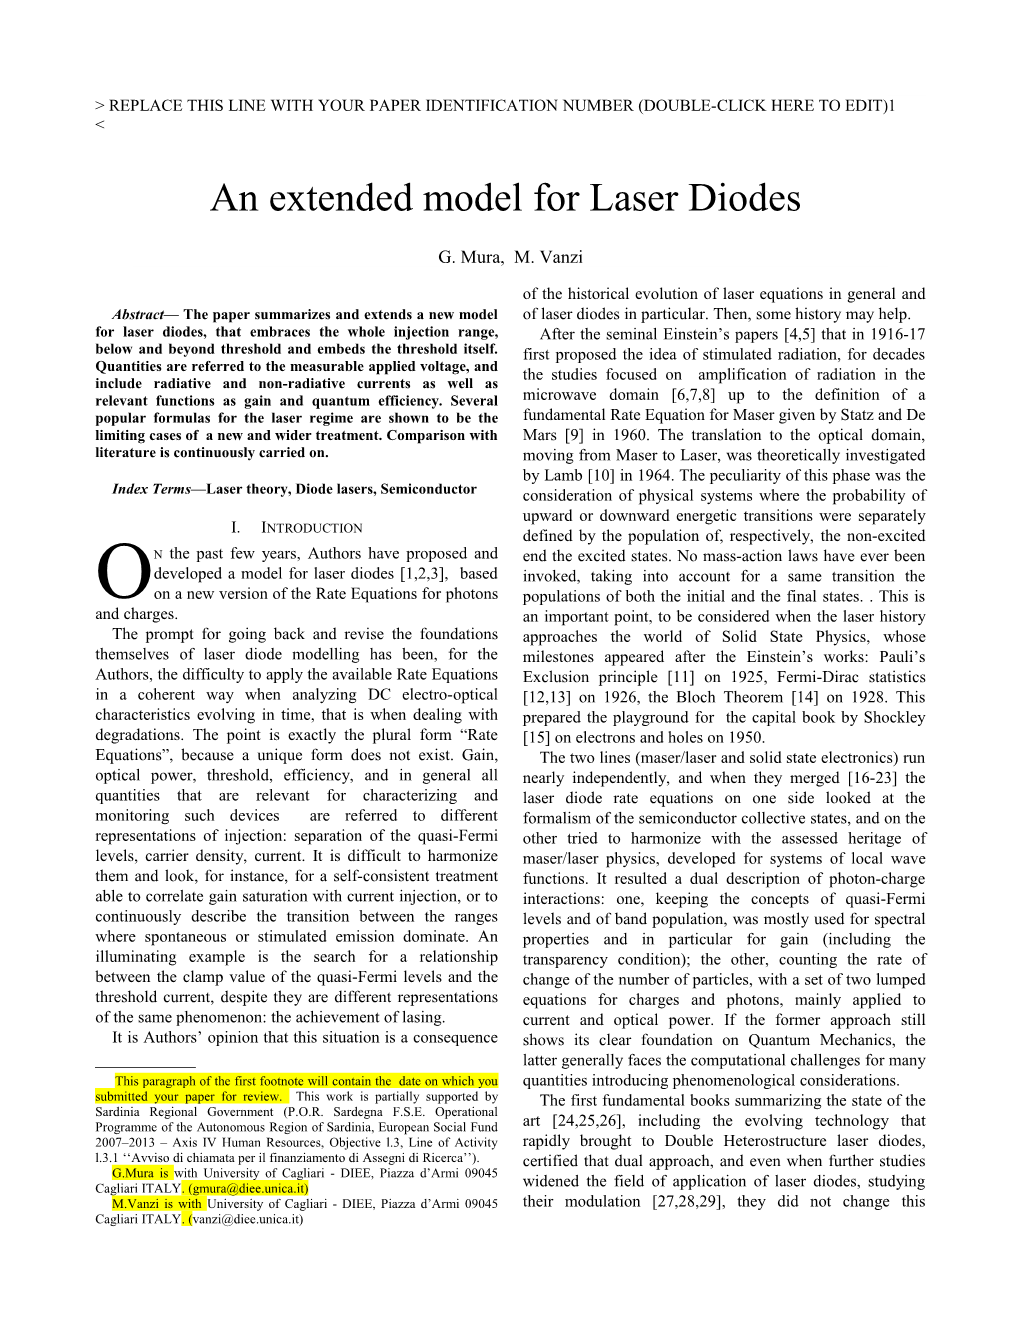 Index Terms Laser Theory, Diode Lasers, Semiconductor